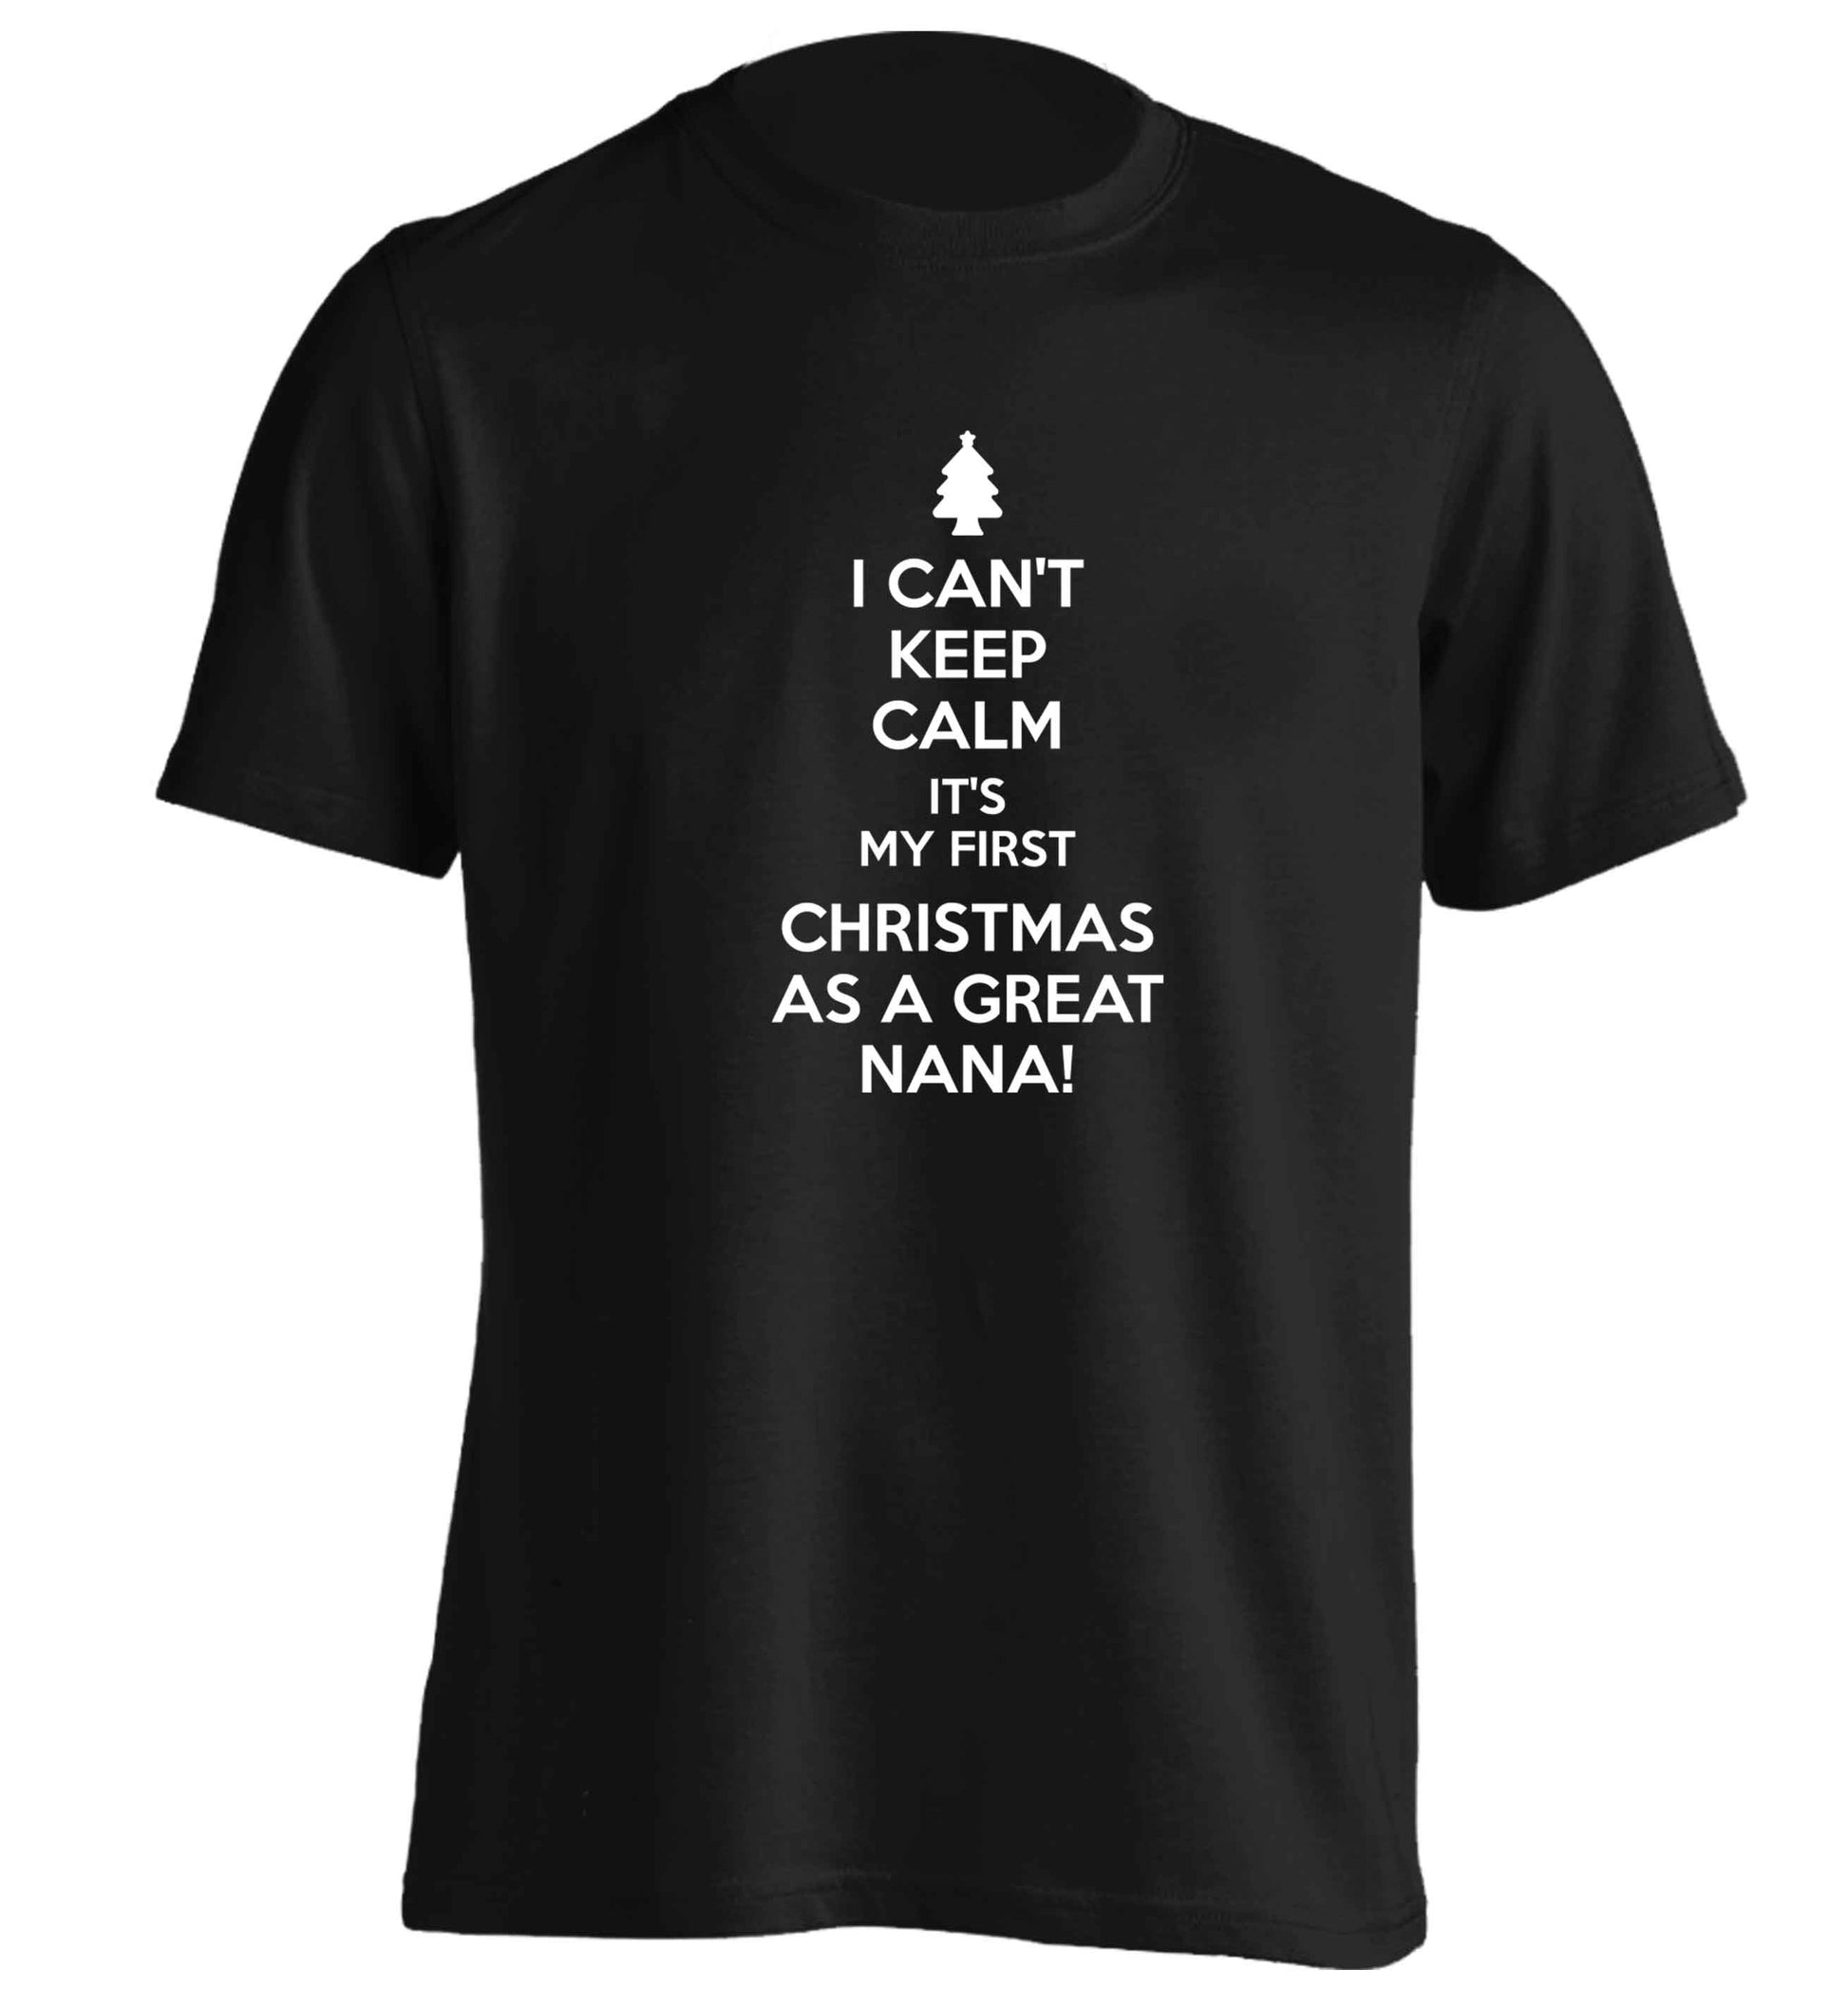 I can't keep calm it's my first Christmas as a great nana! adults unisex black Tshirt 2XL